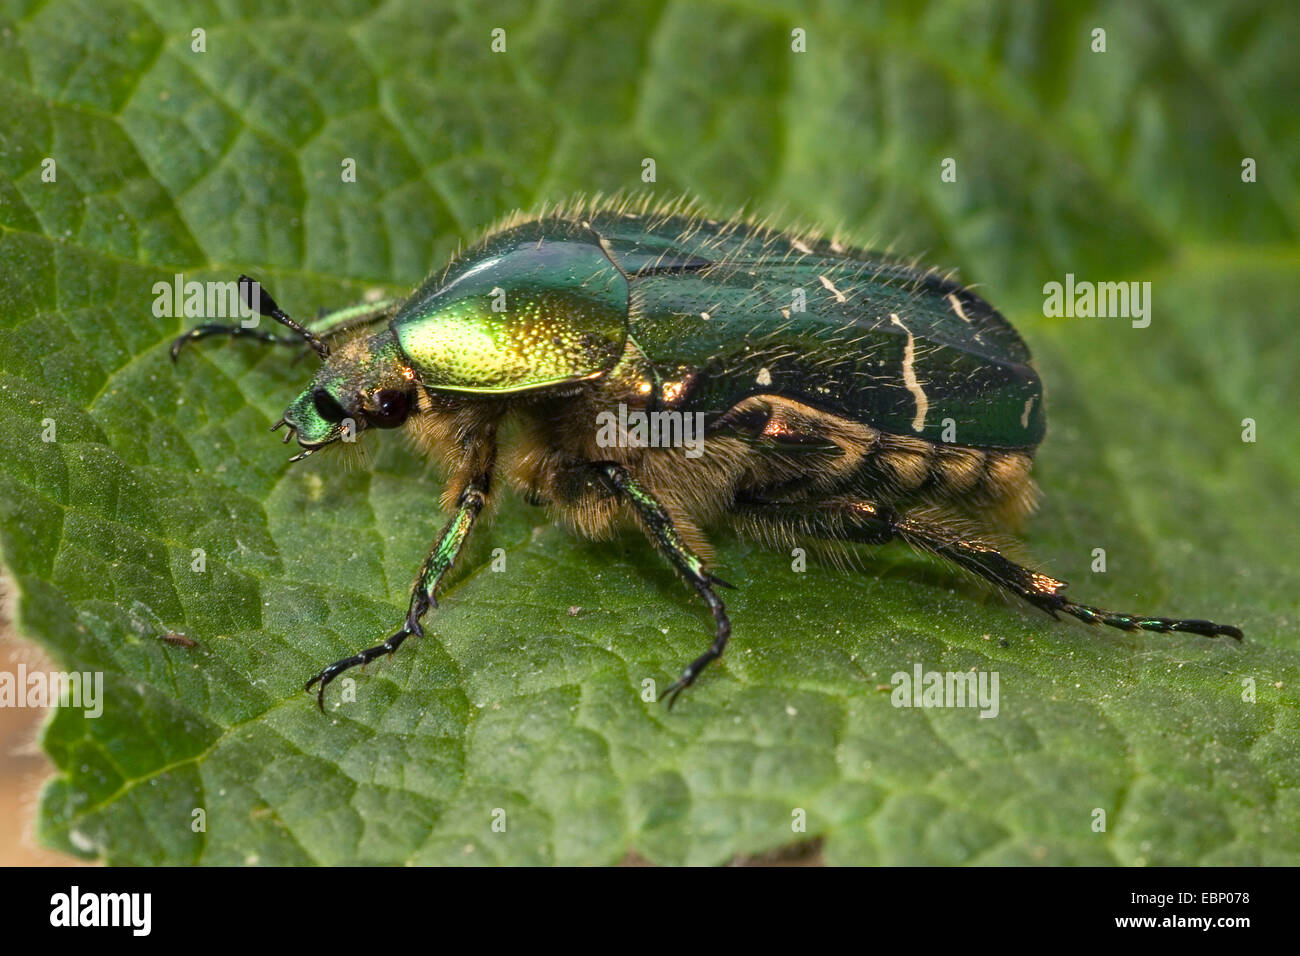 rose chafer (Cetonia aurata), on a leaf, Germany Stock Photo